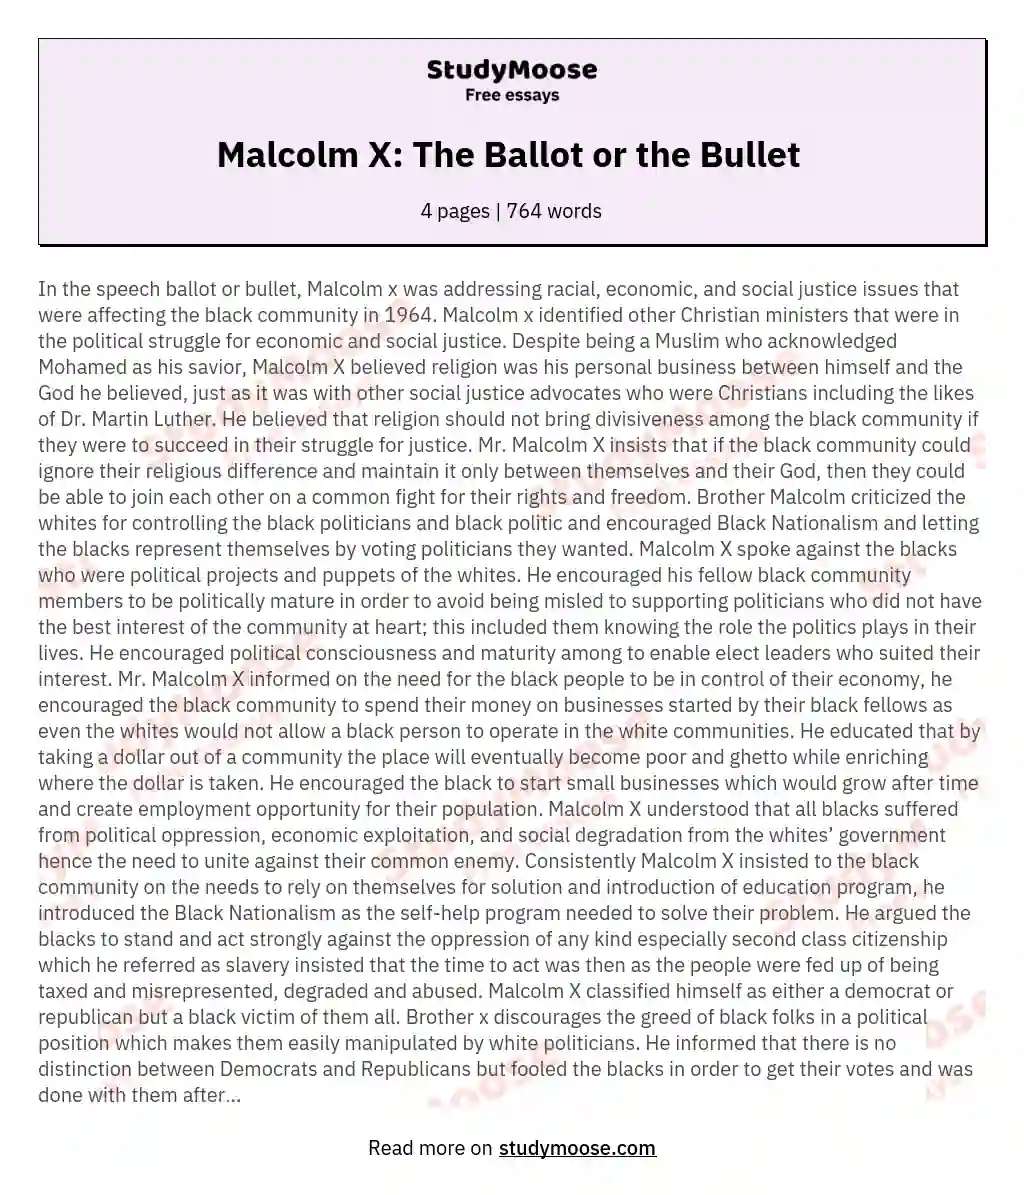 Malcolm X: The Ballot or the Bullet  essay